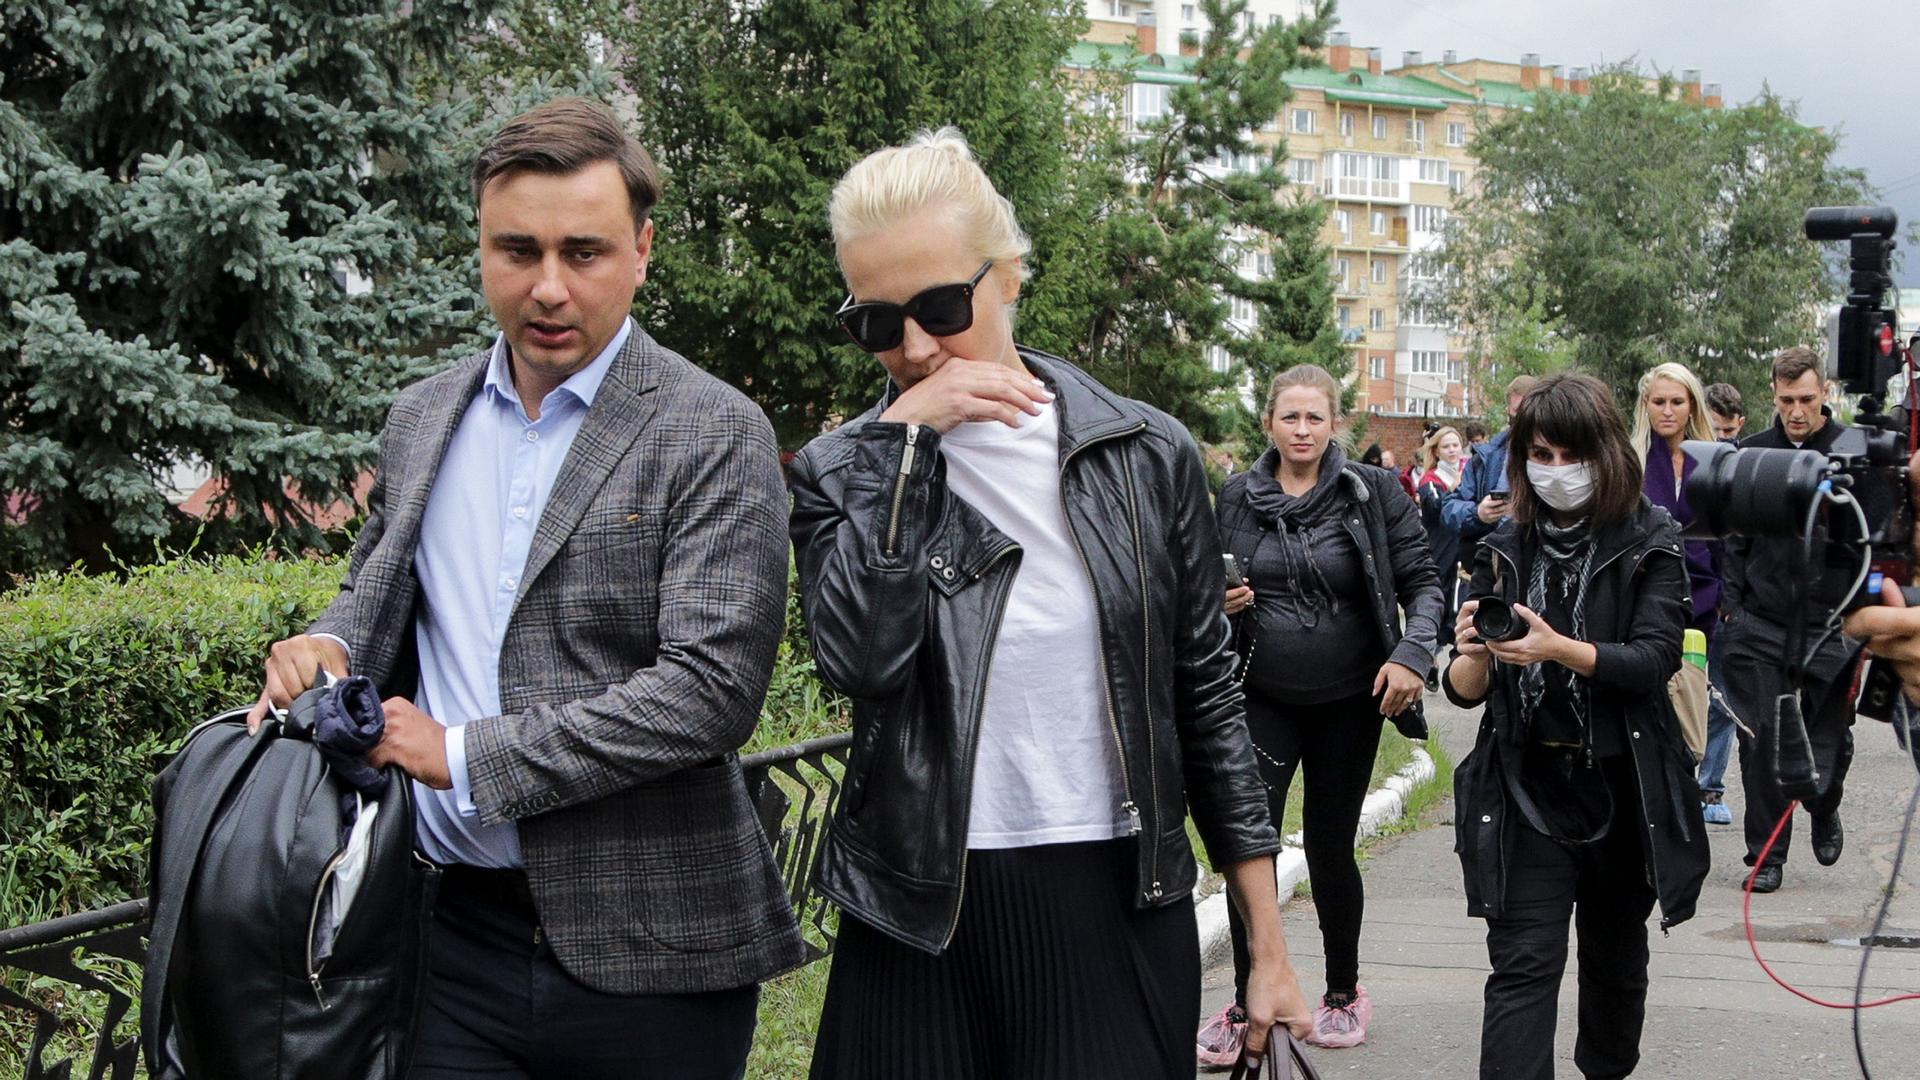 Alexei Navalny's wife Yulia, center, is shown walking and being followed by members of the media.